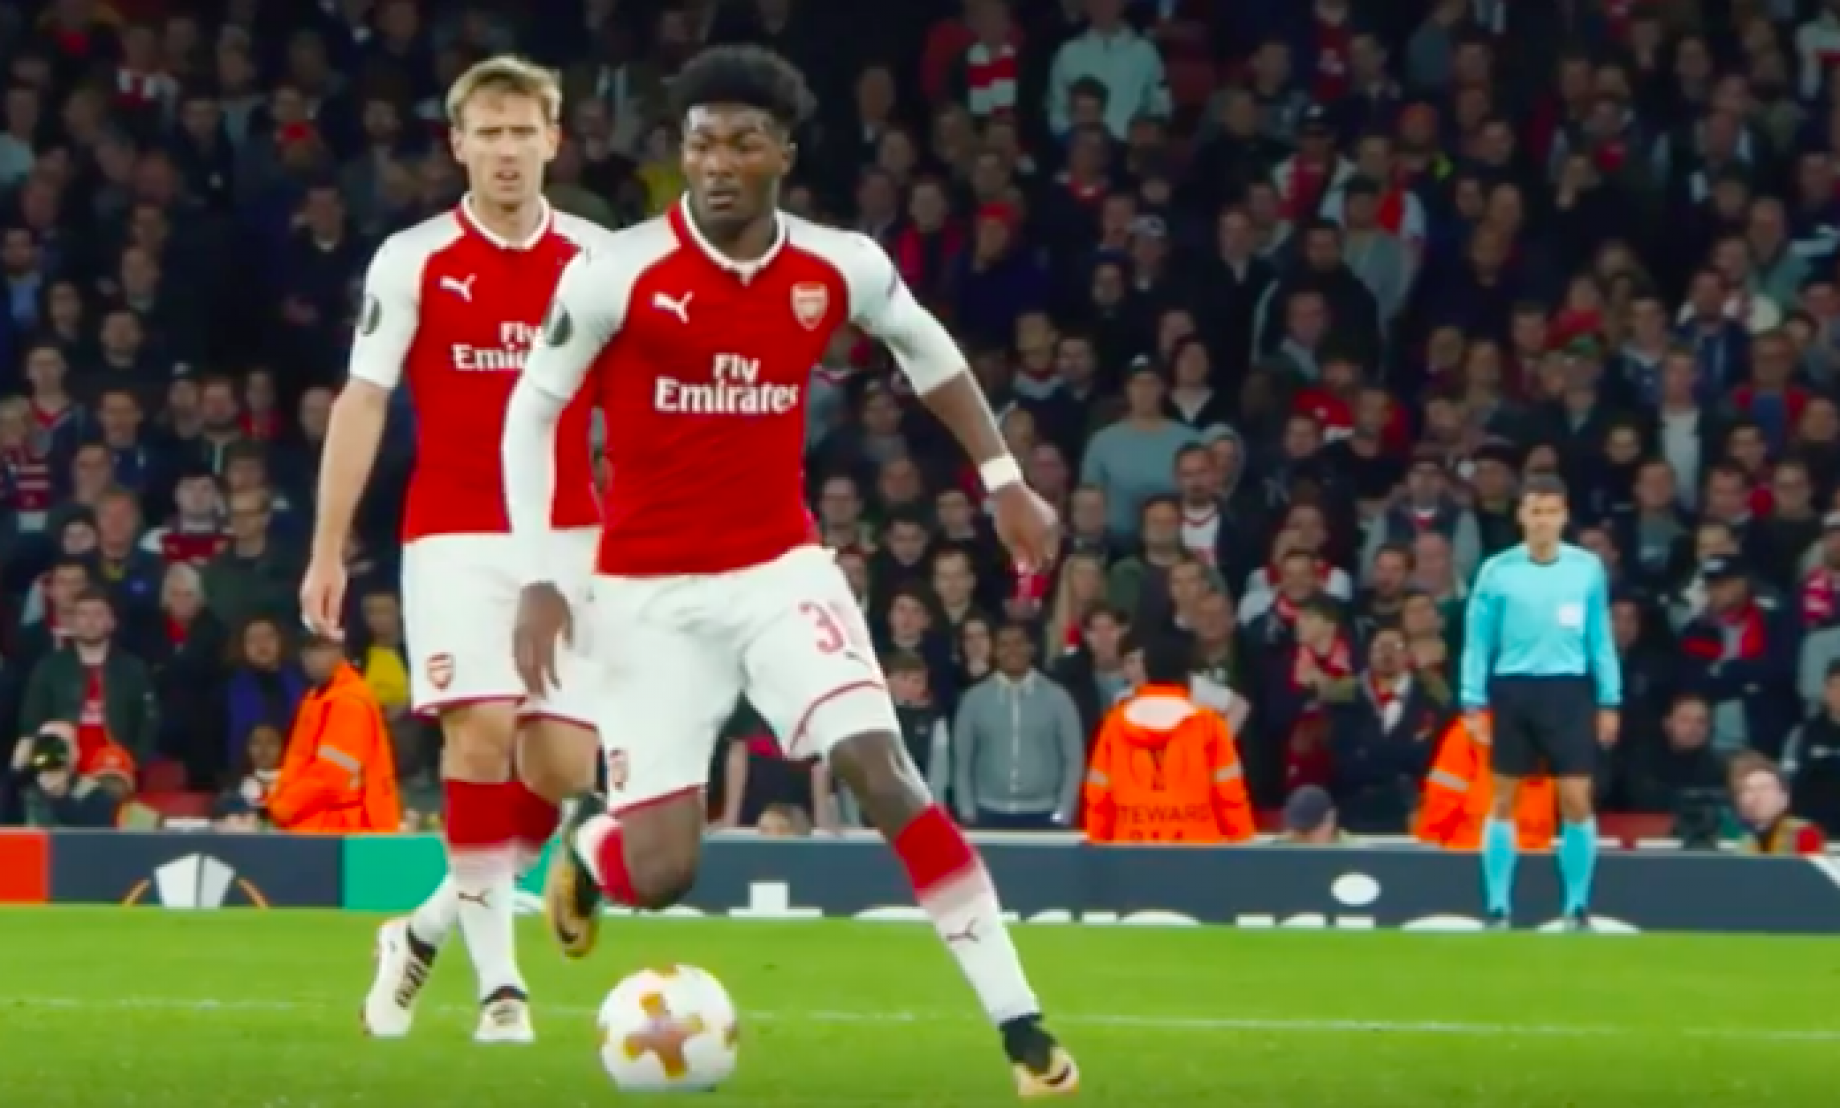 maitland-niles_gallery.png